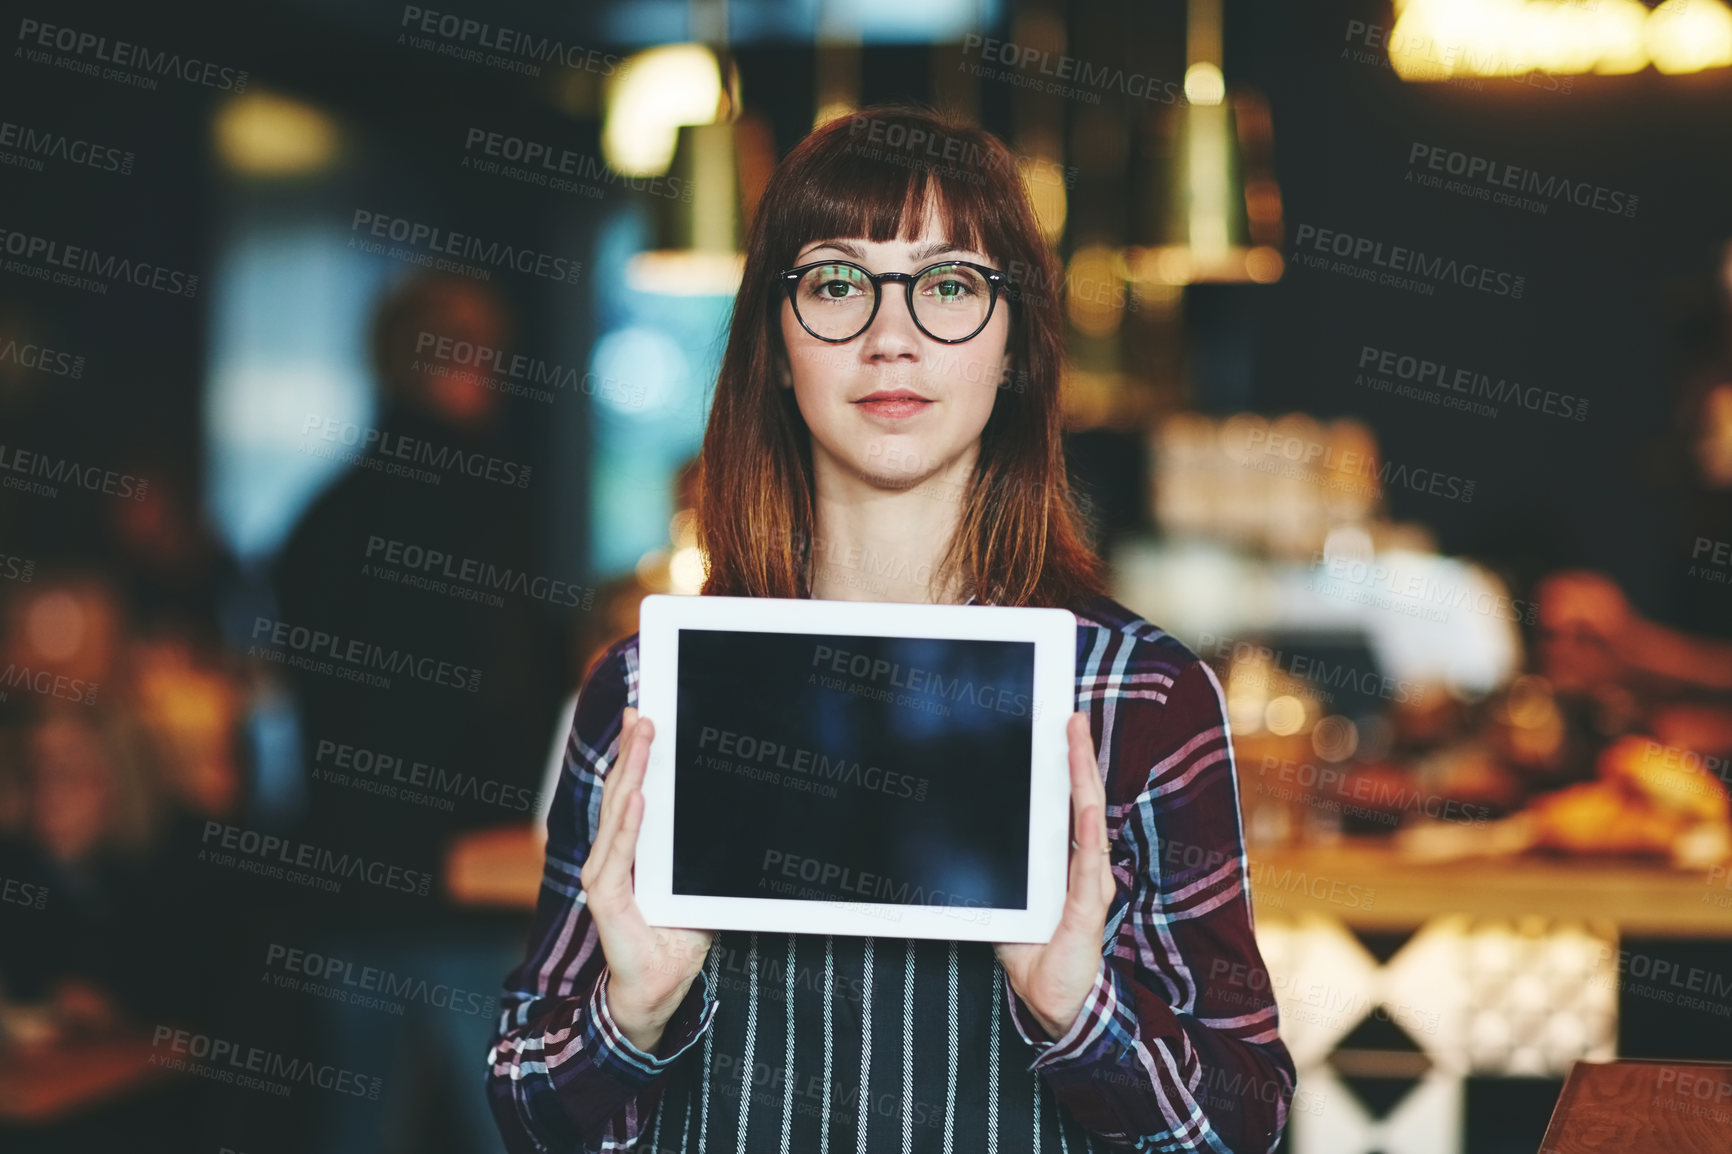 Buy stock photo Shot of a young woman holding a digital tablet with a blank screen in a coffee shop